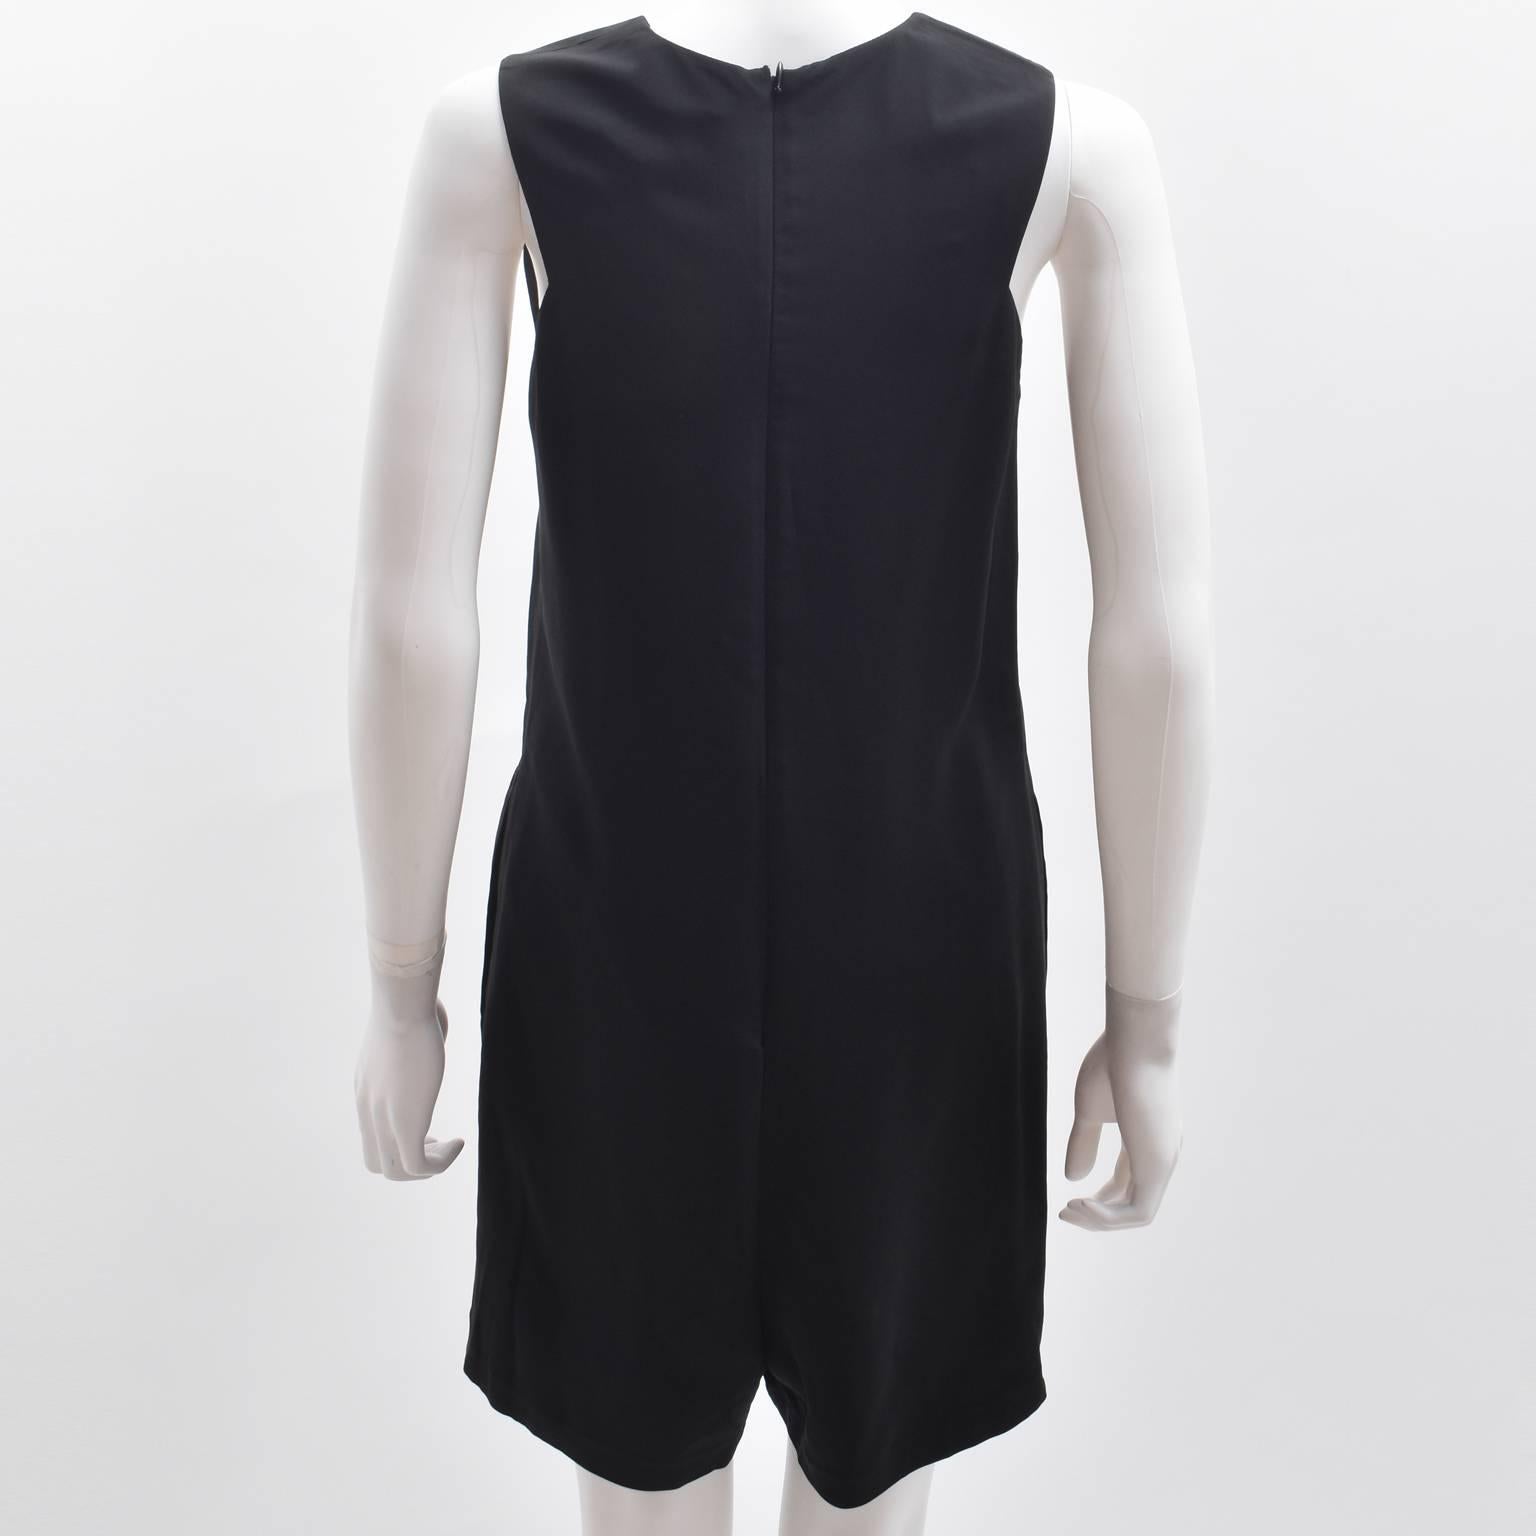 Women's or Men's The Row Black Minimal Sleeveless Playsuit For Sale